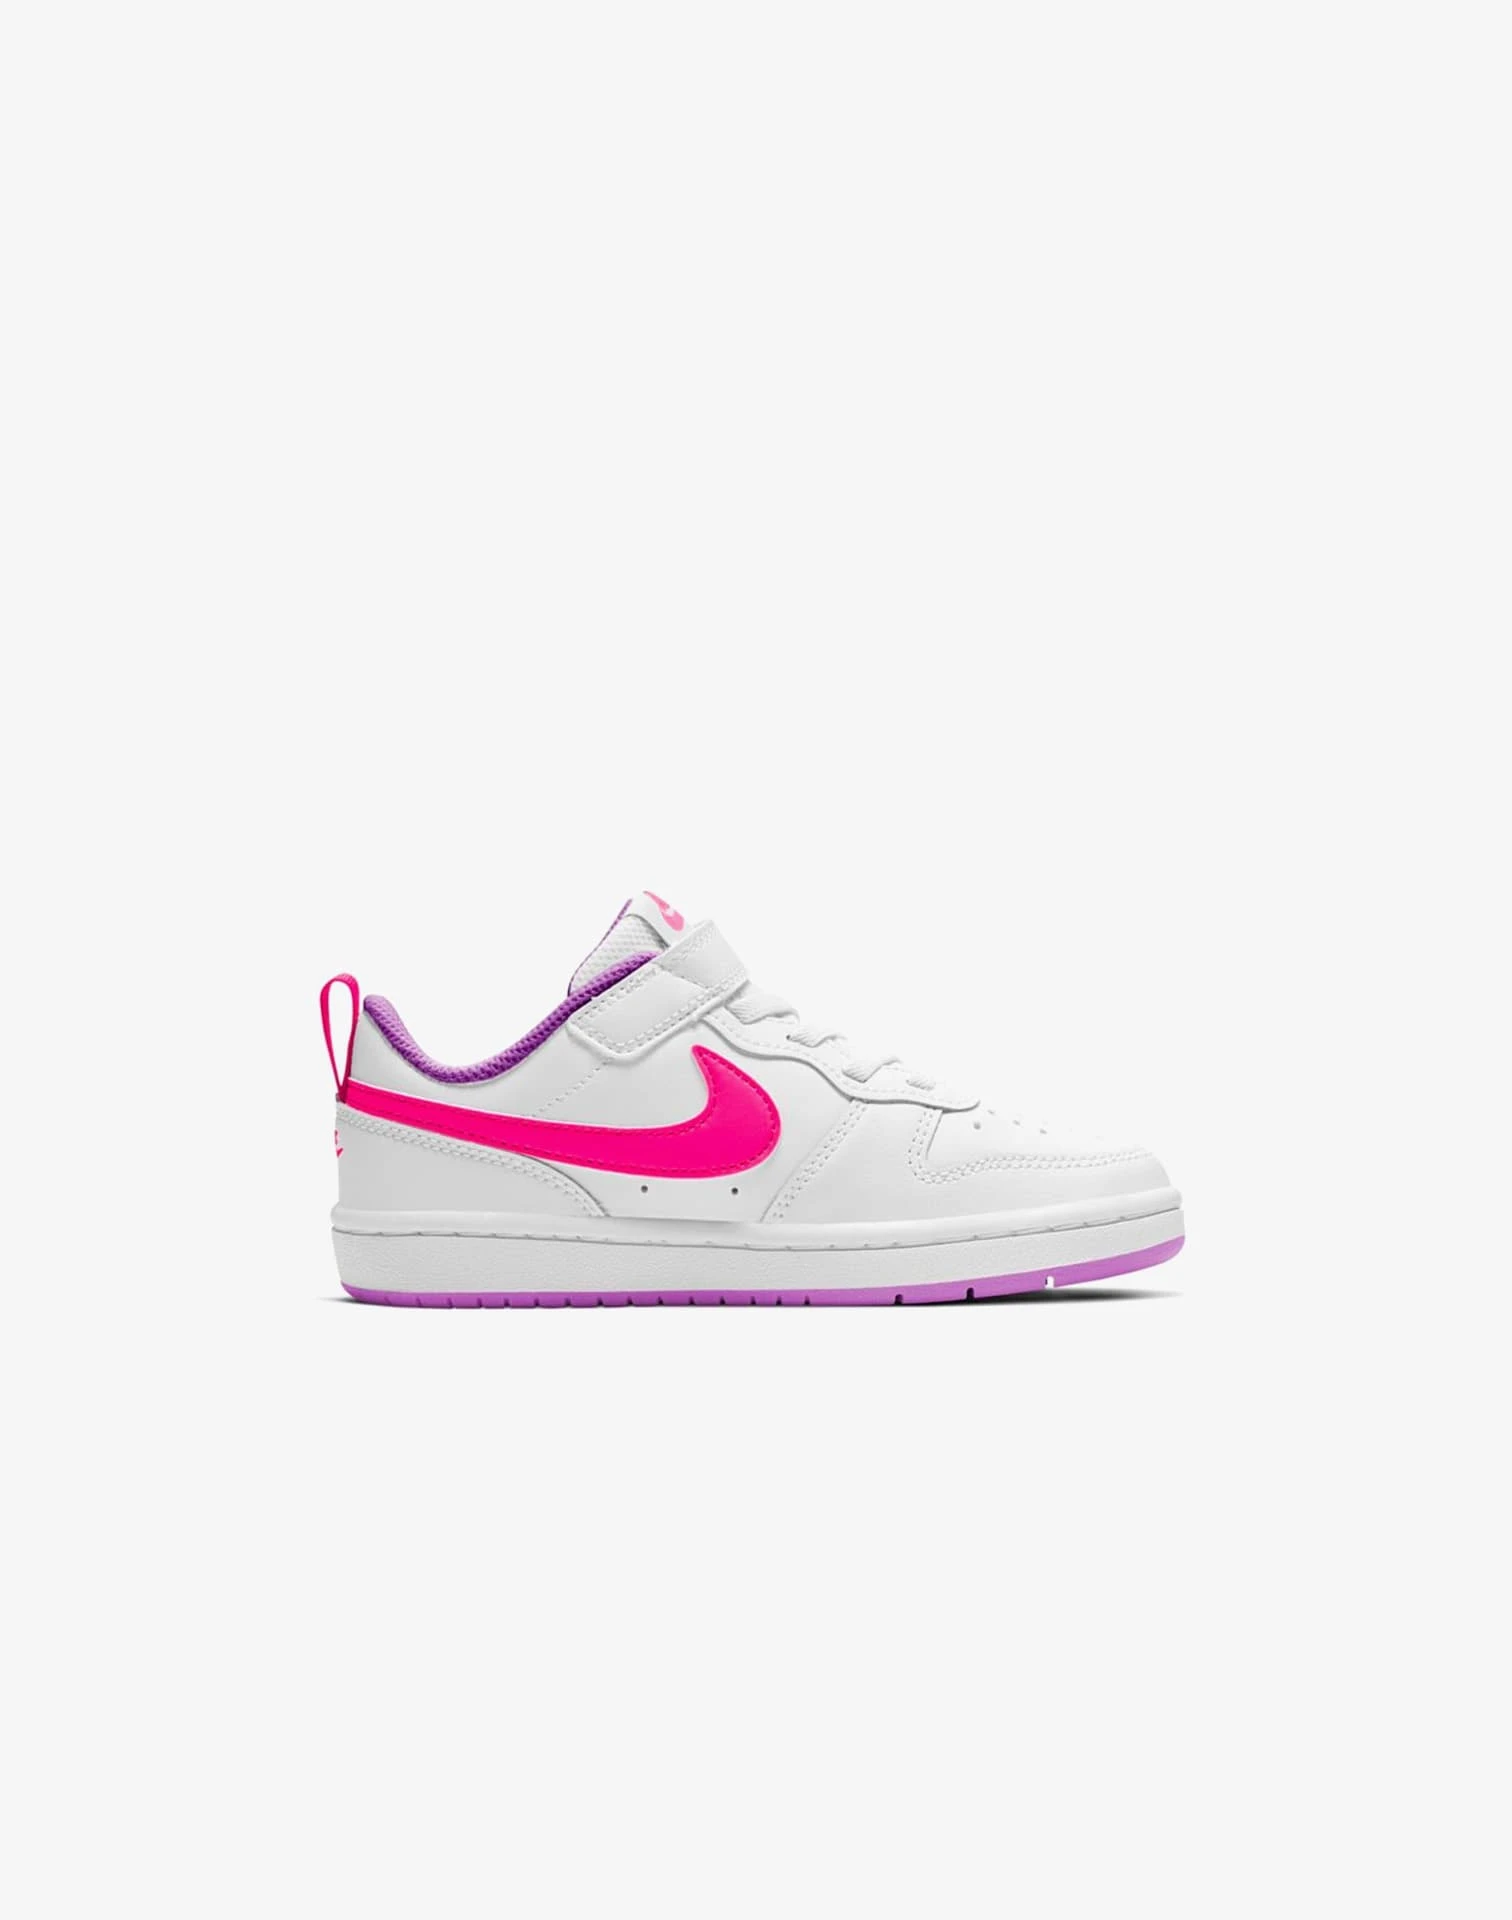 NIKE | COURT BOROUGH LOW 2 (PSV) YOUTH,商家EnRoute Global,价格¥440